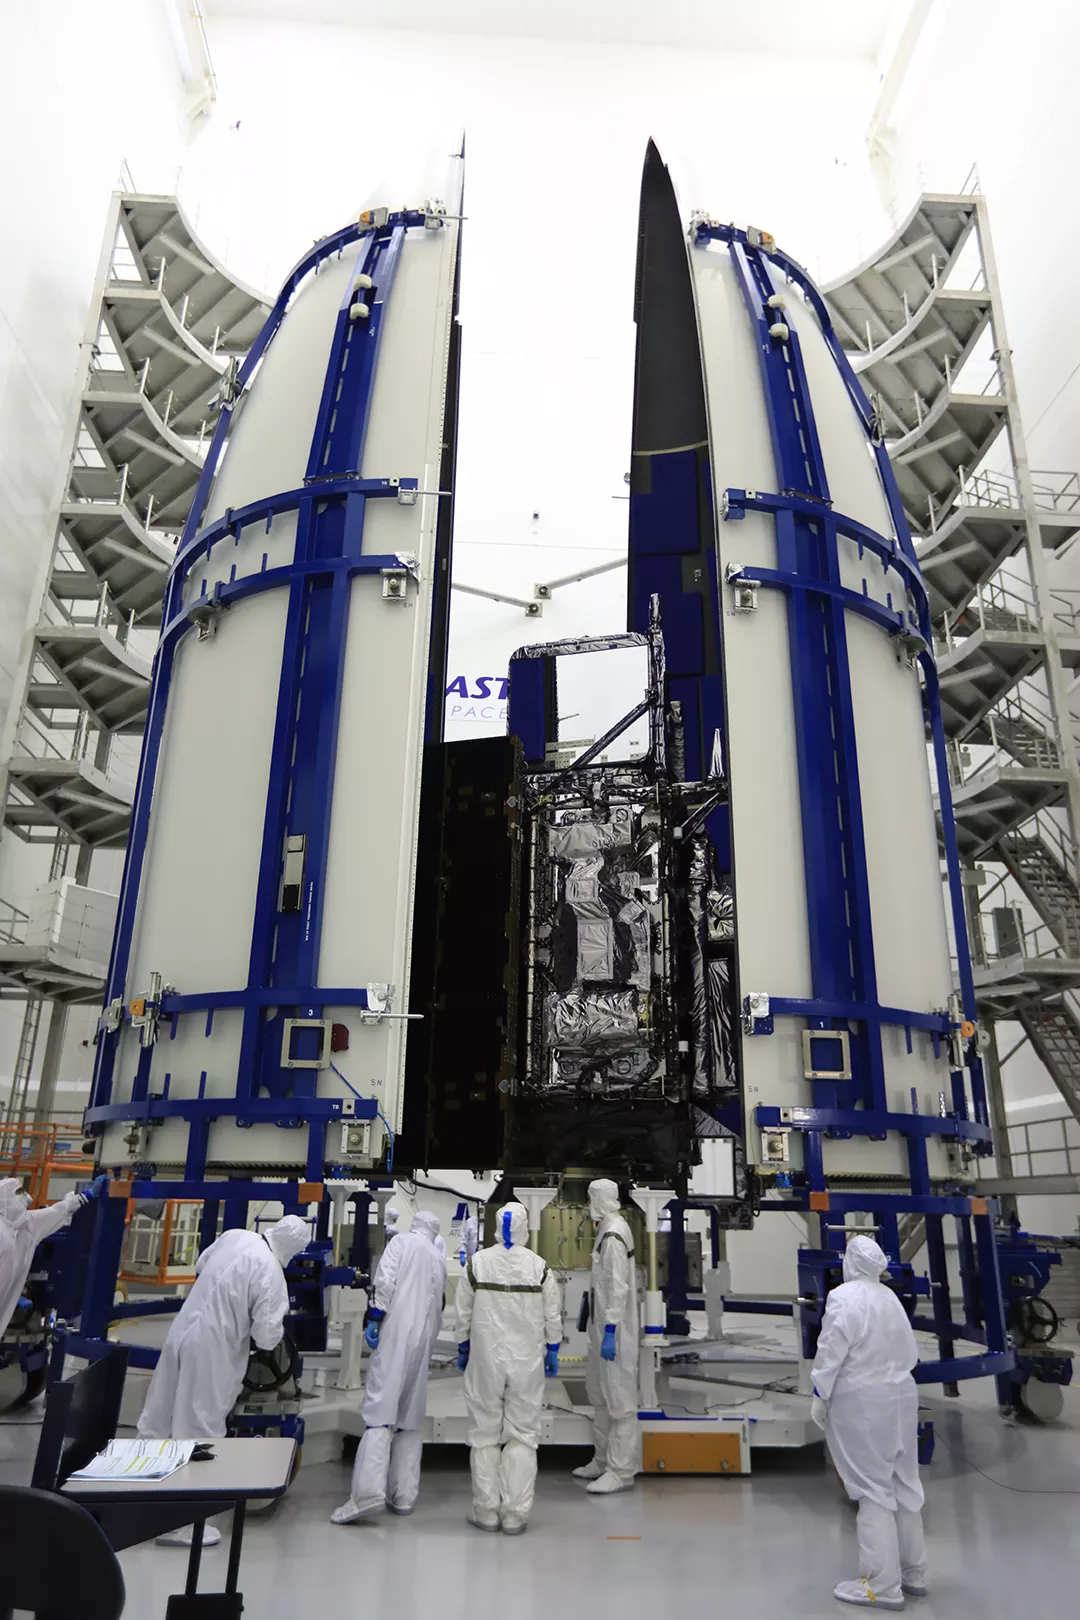 Encapsulating the GOES-R satellite in its payload fairing.